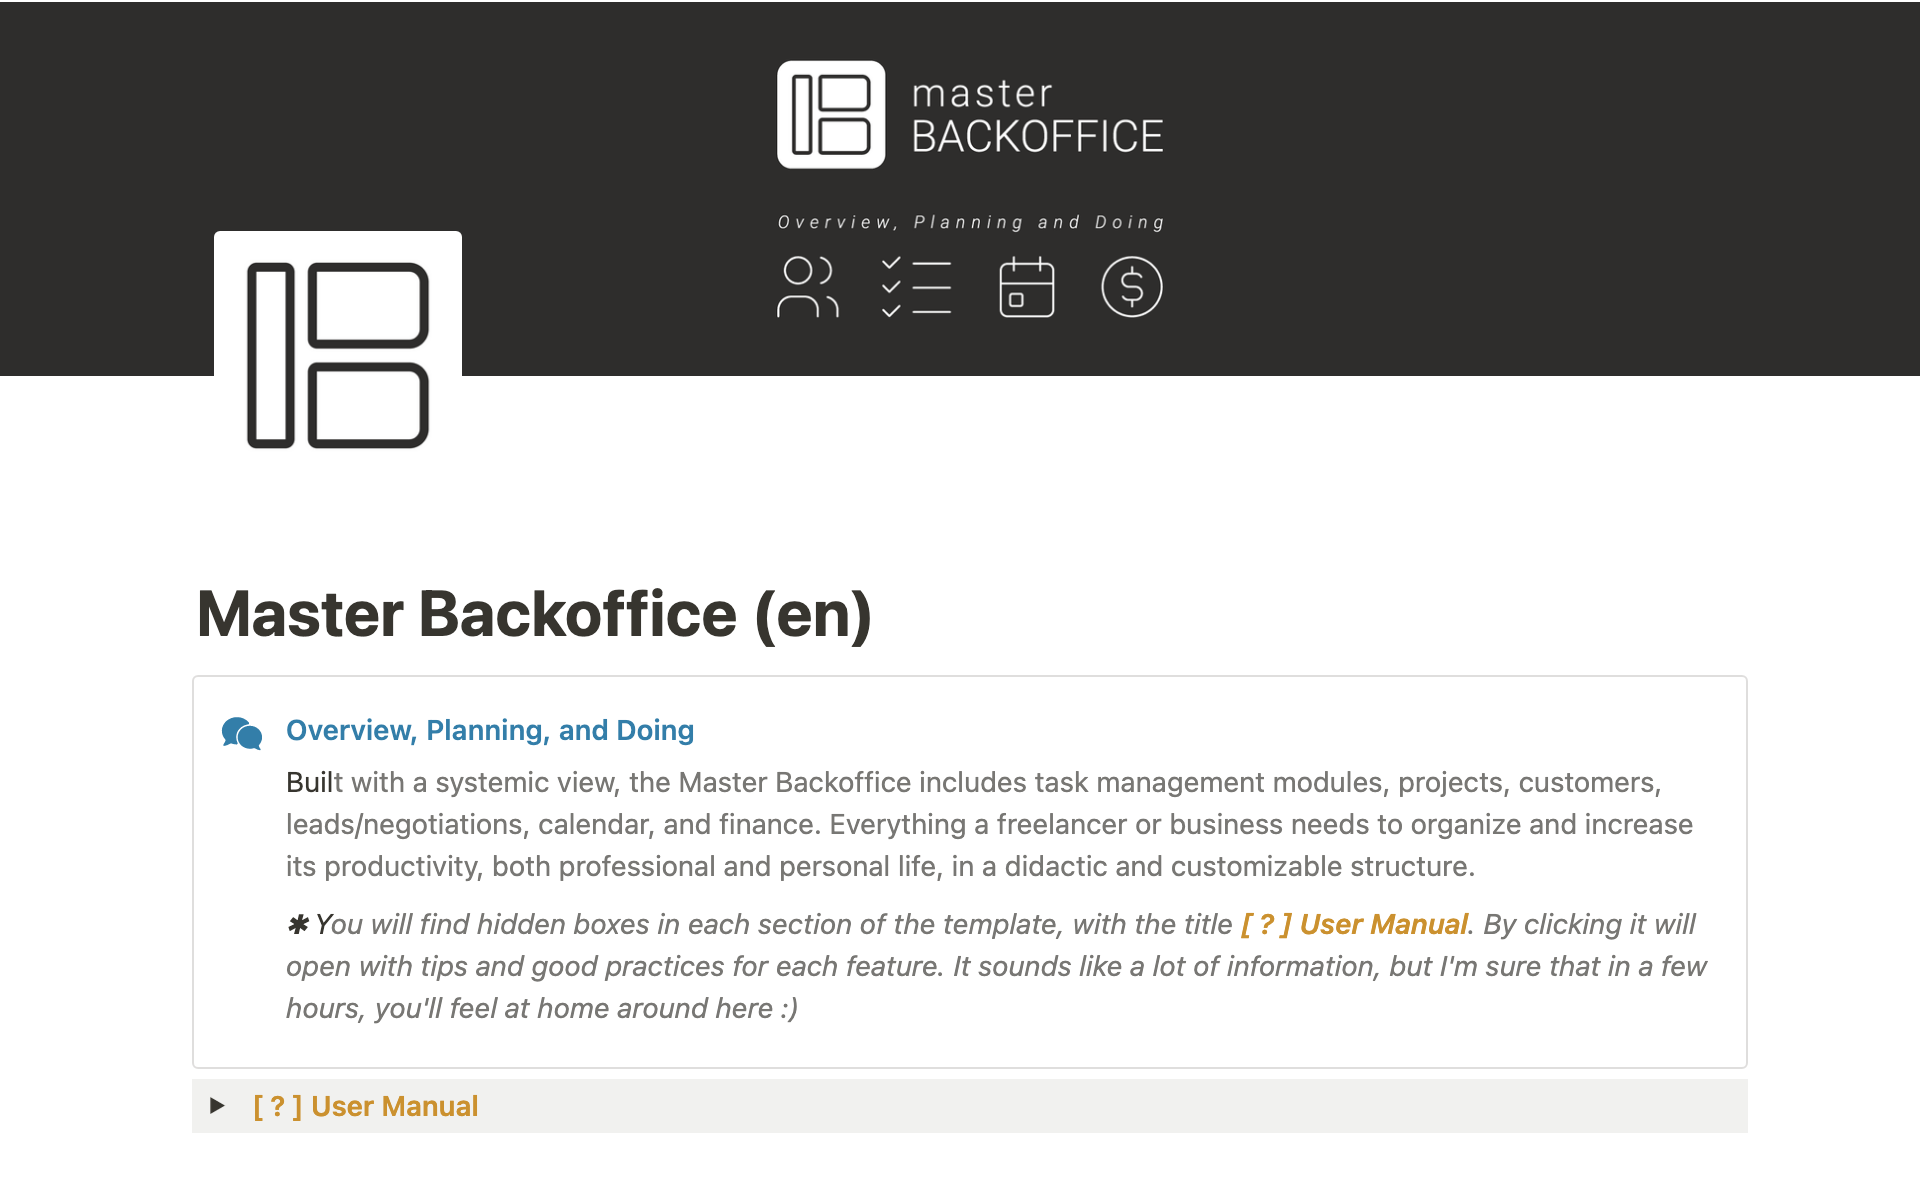 Built with a systemic view, the Master Backoffice includes task management modules, projects, customers, leads/negotiations, calendar, and finance.